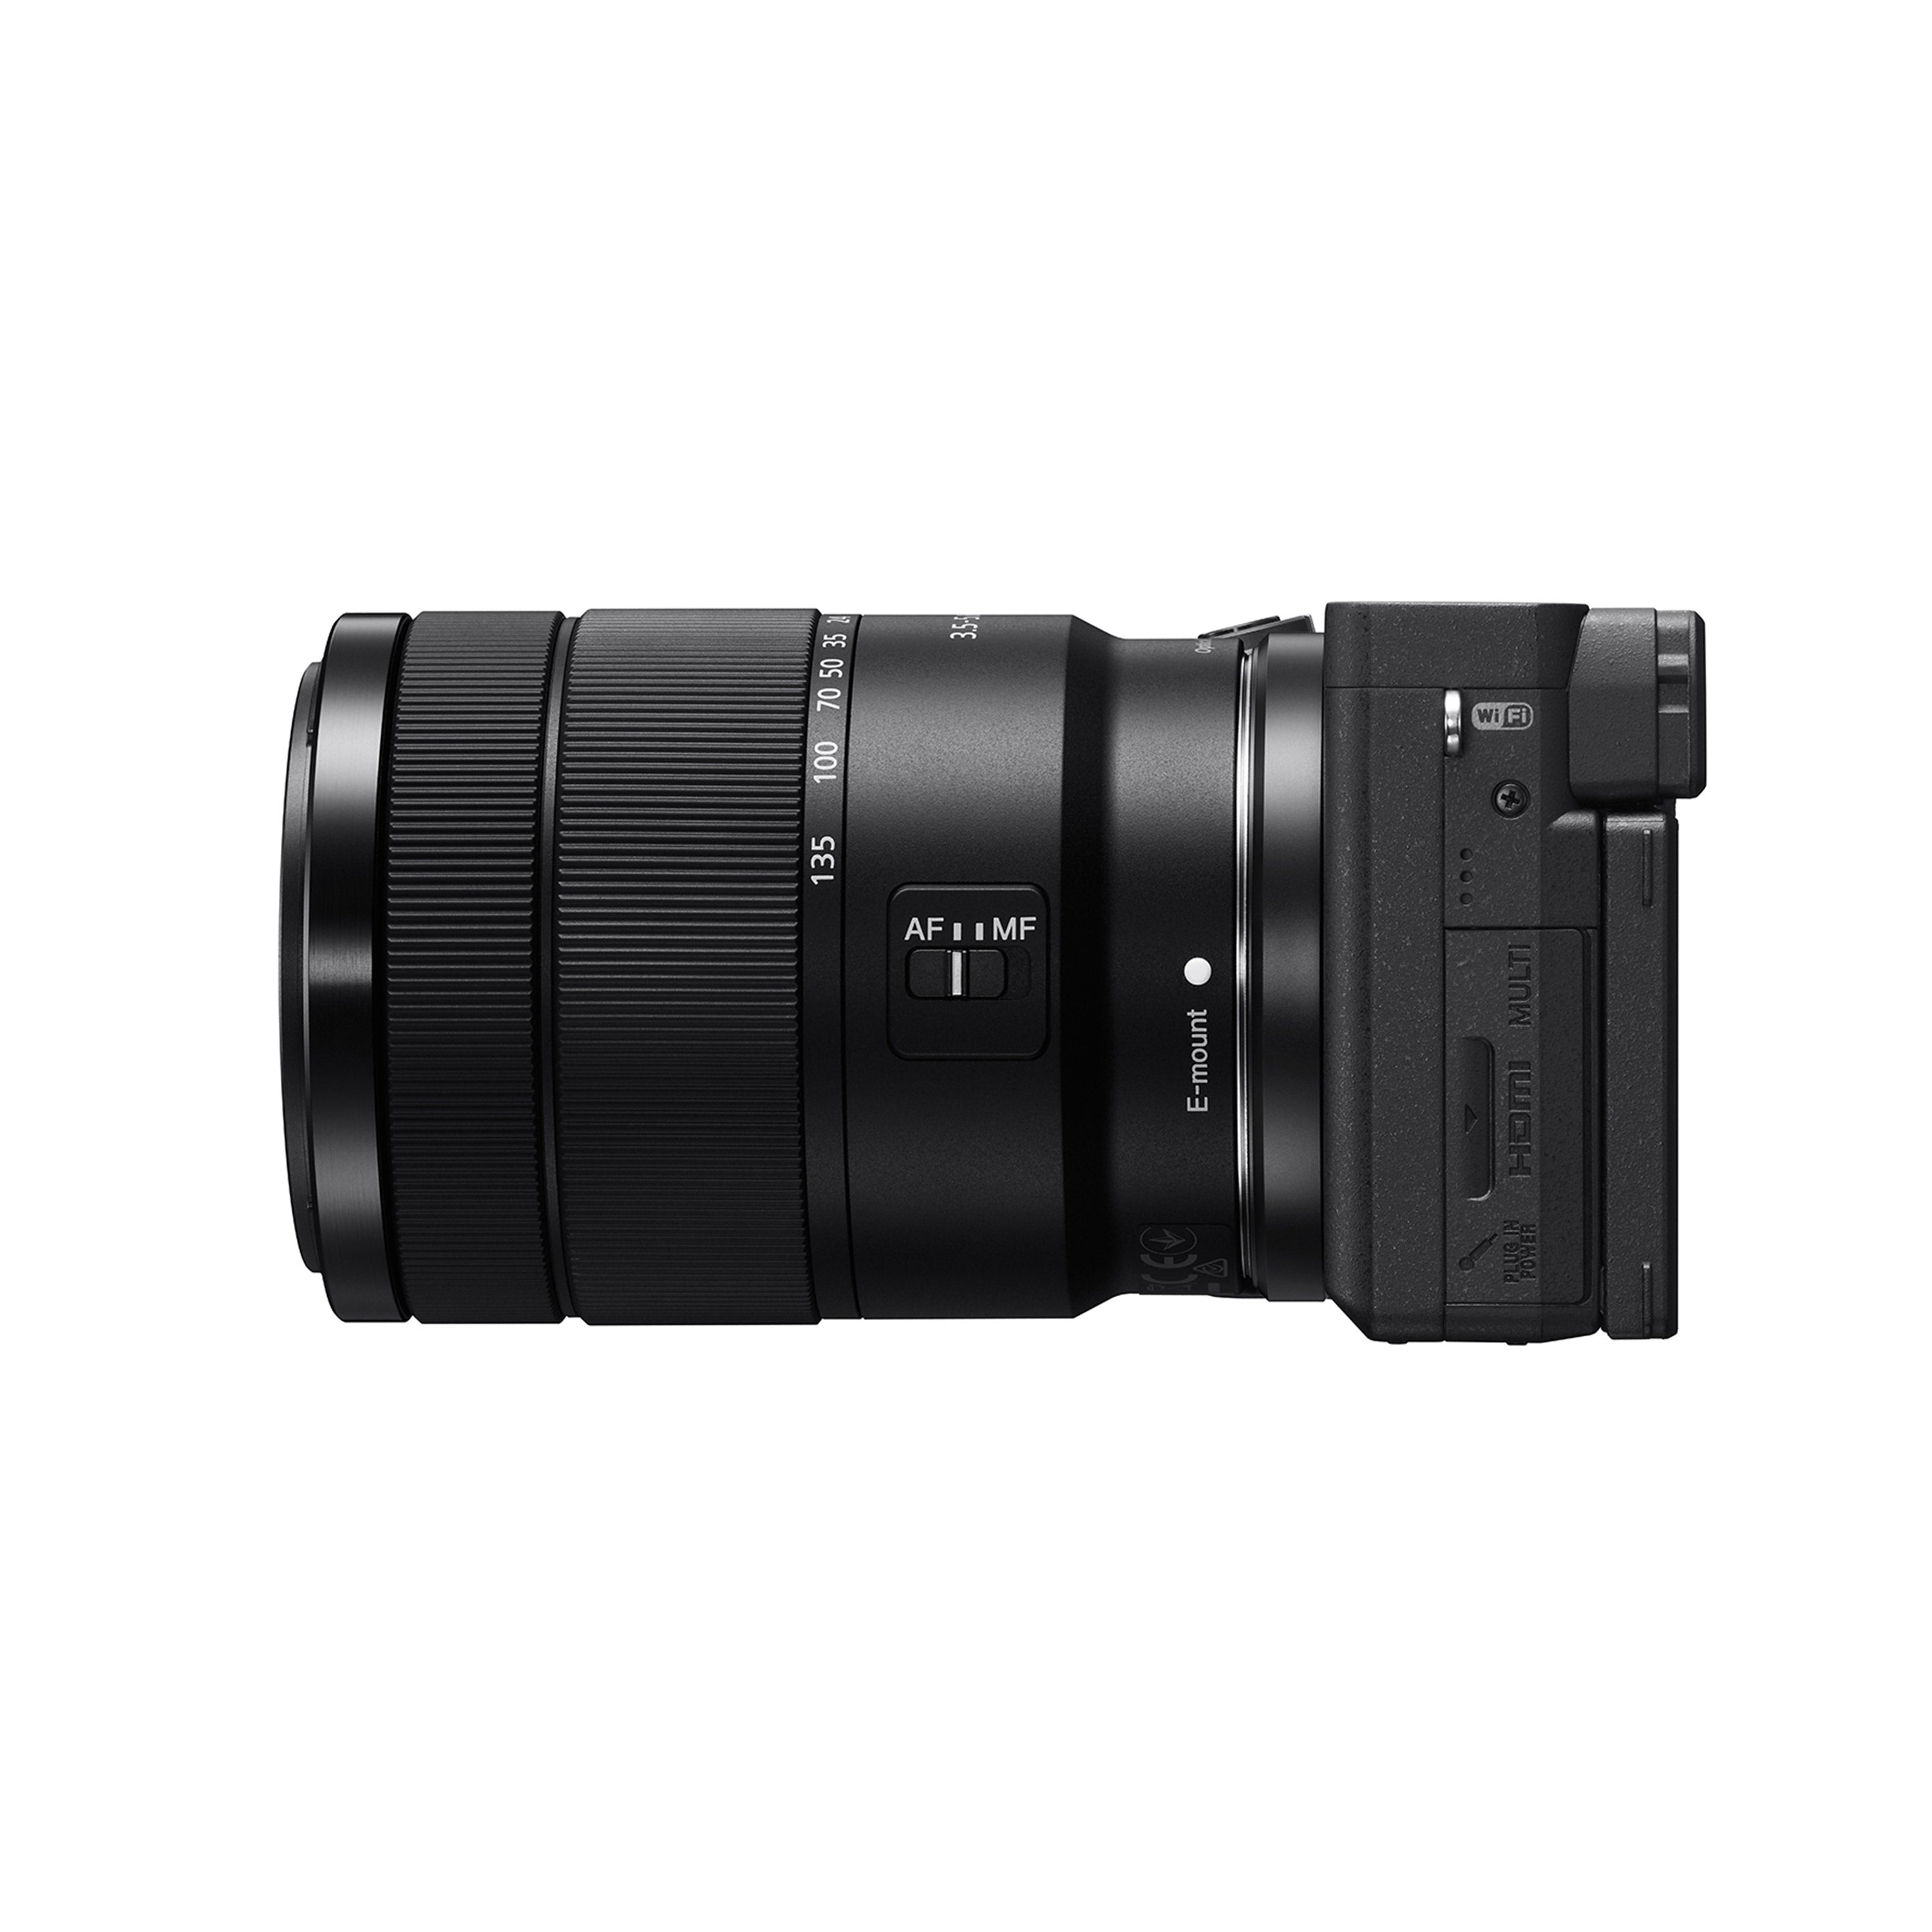 a6400 E-mount camera with APS-C Sensor with 18-135mm Zoom Lens